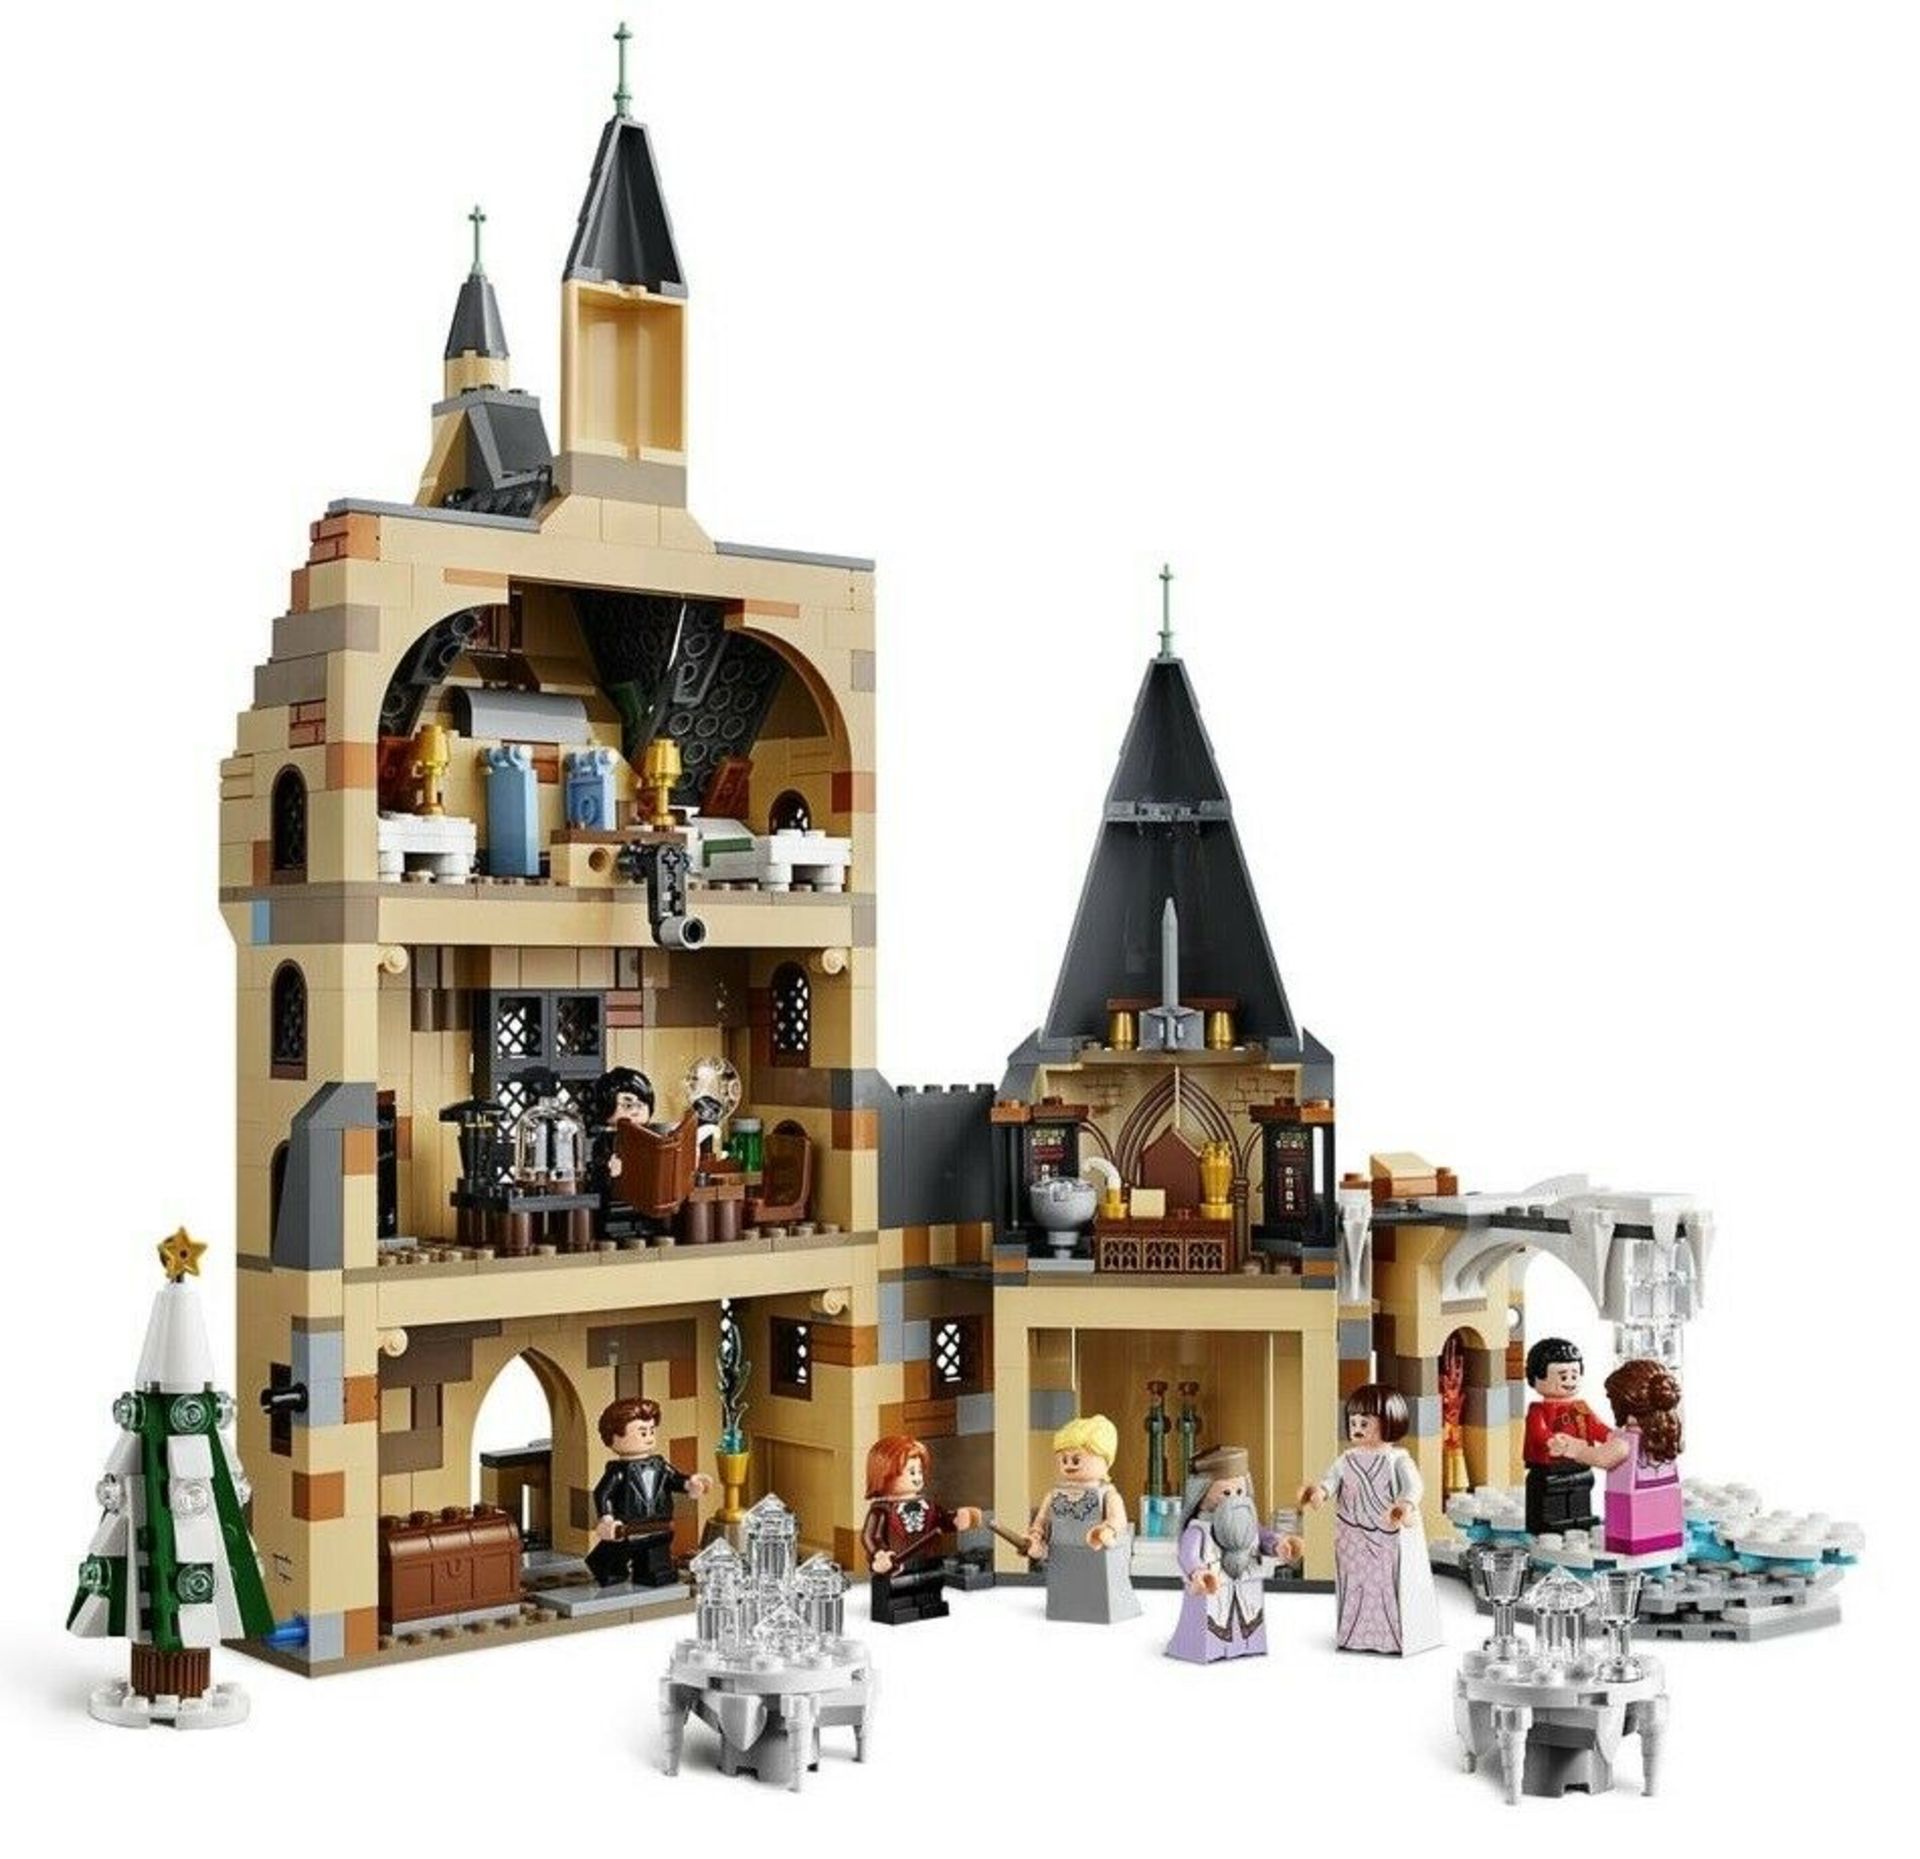 1 x Lego Harry Potter Hogwarts Clock Tower 75948 Lego Playset - Boxed and Sealed - CL007 - Location: - Image 4 of 5